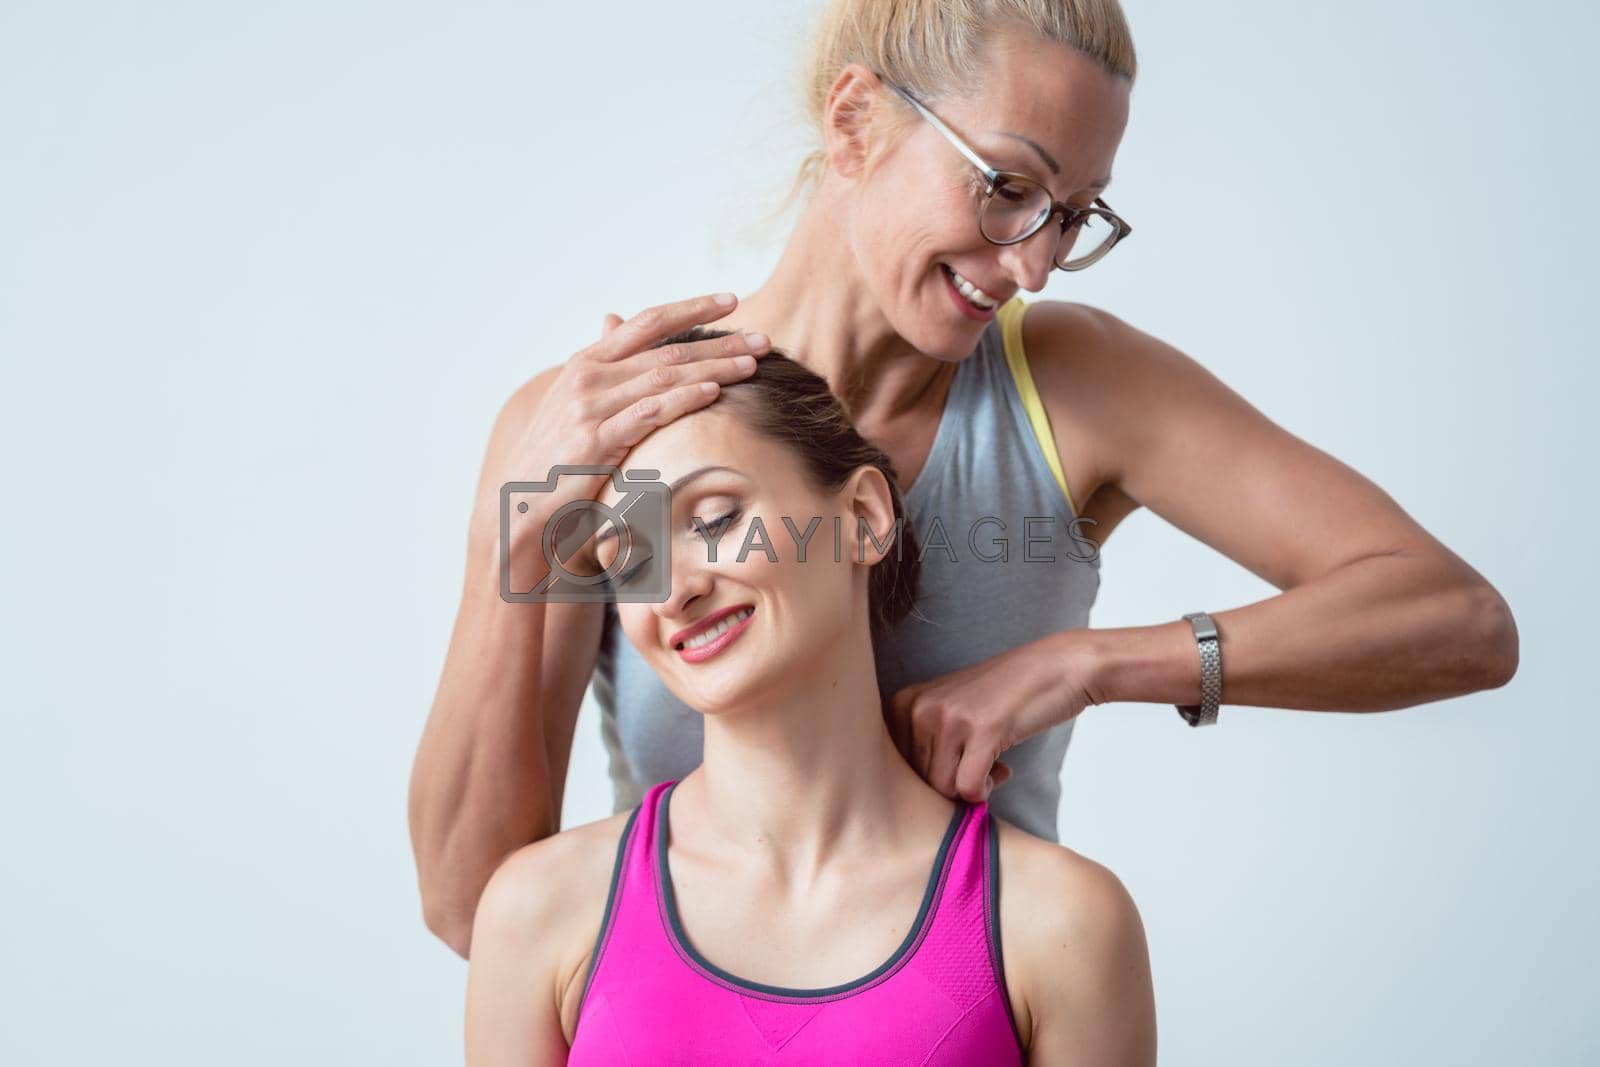 Royalty free image of Physical therapist working on head and shoulders of patient by Kzenon